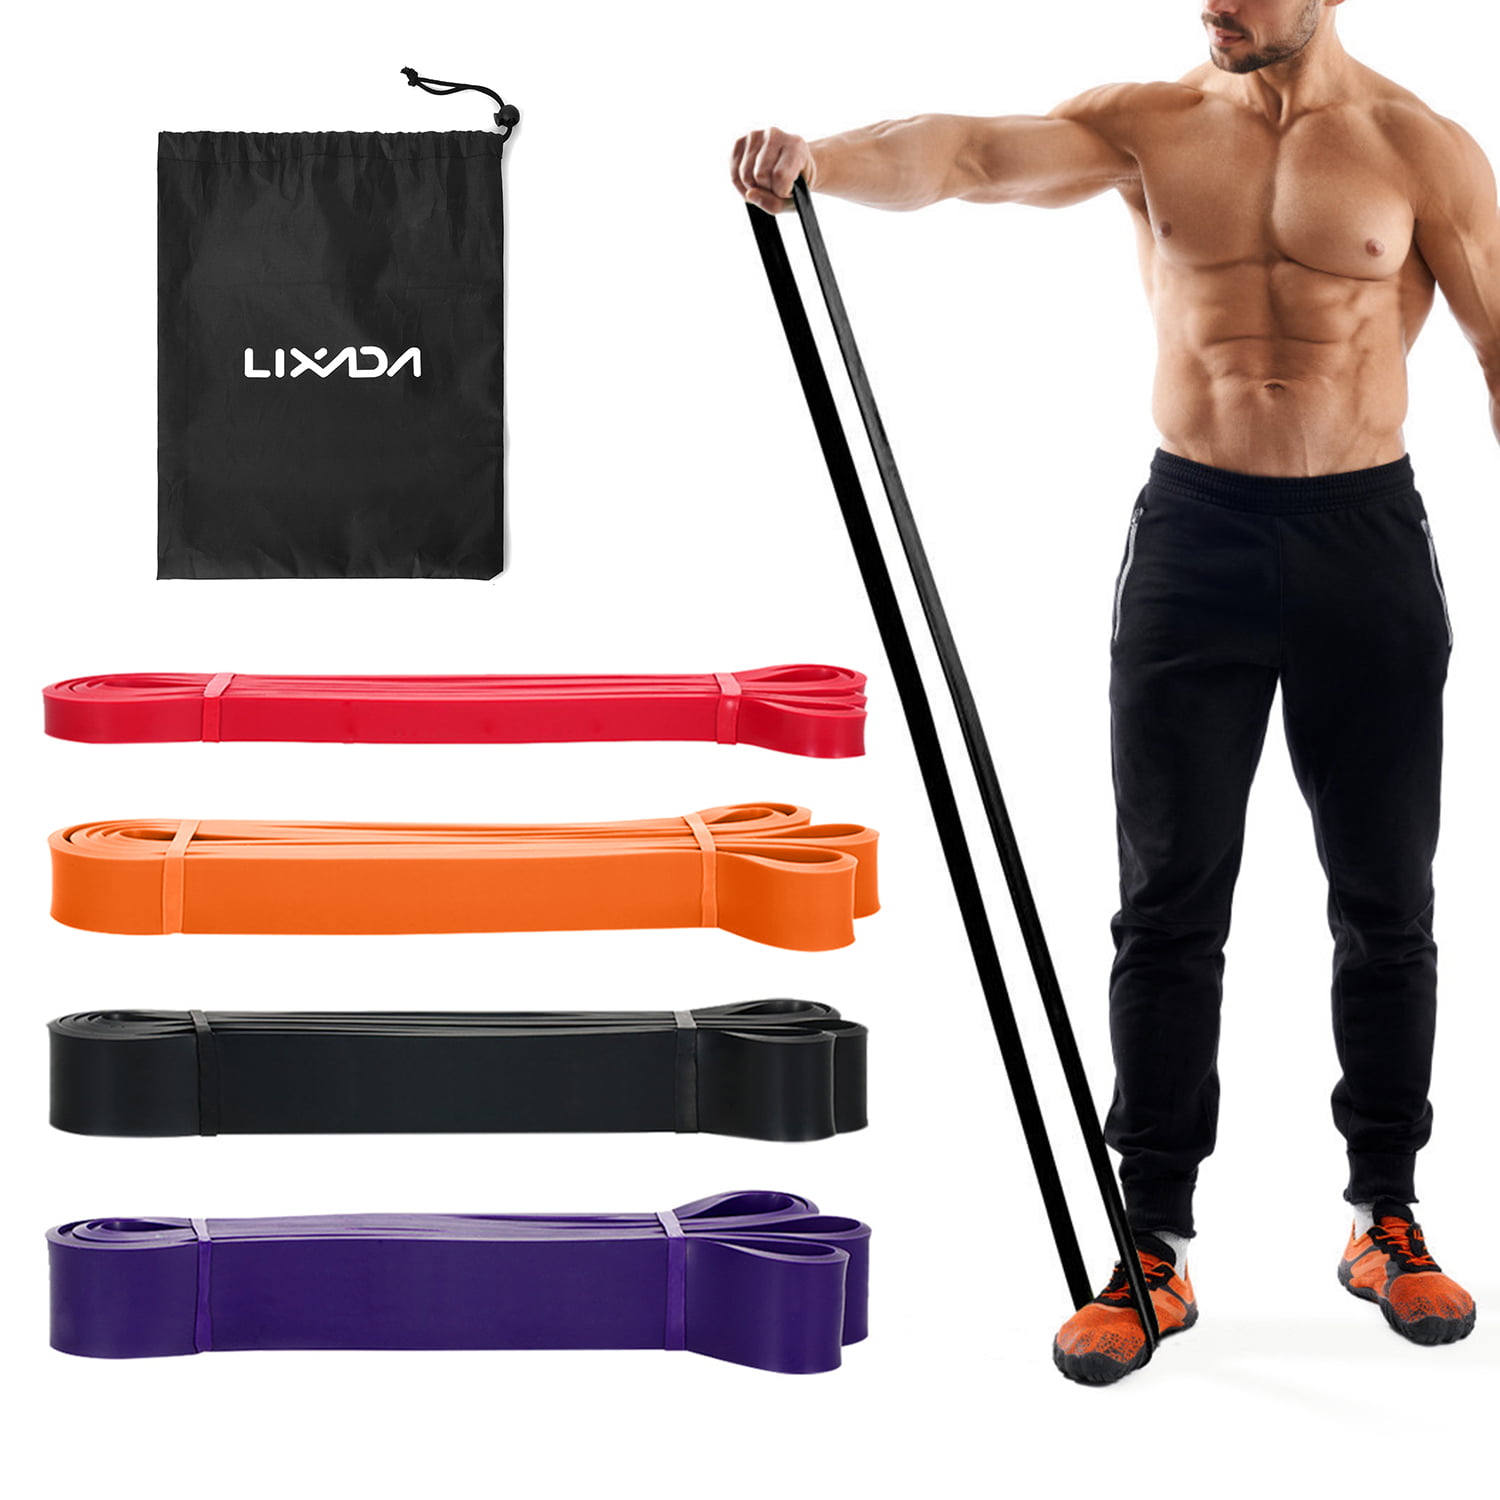 Wyox Heavy Duty Resistance Bands for Gym Exercise Pull up Fitness Workout 